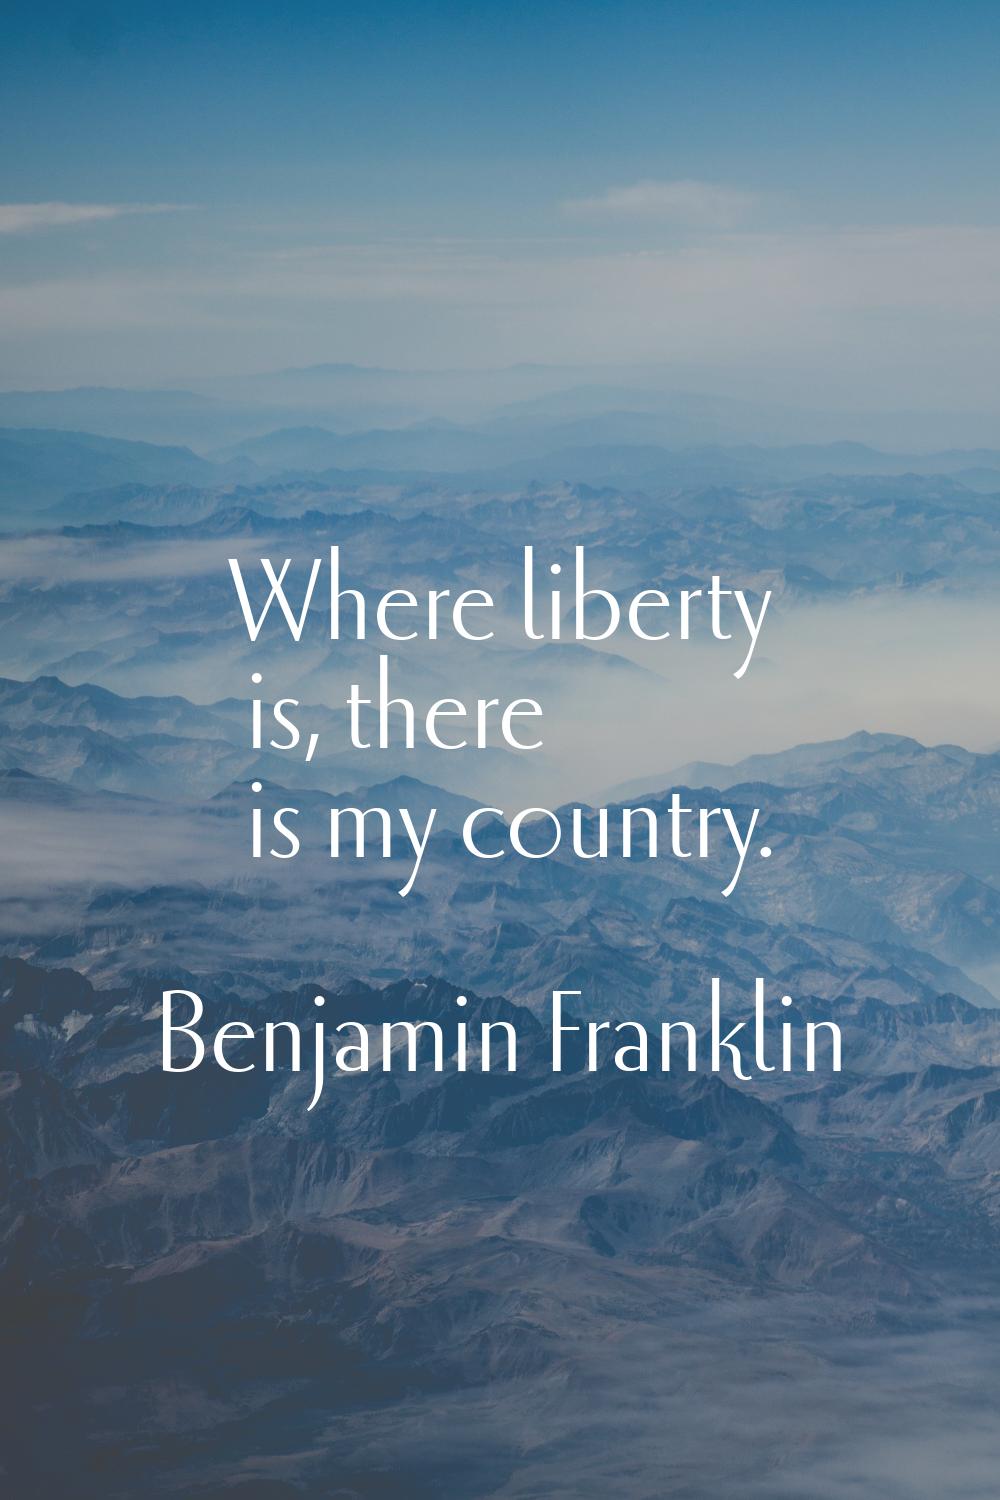 Where liberty is, there is my country.